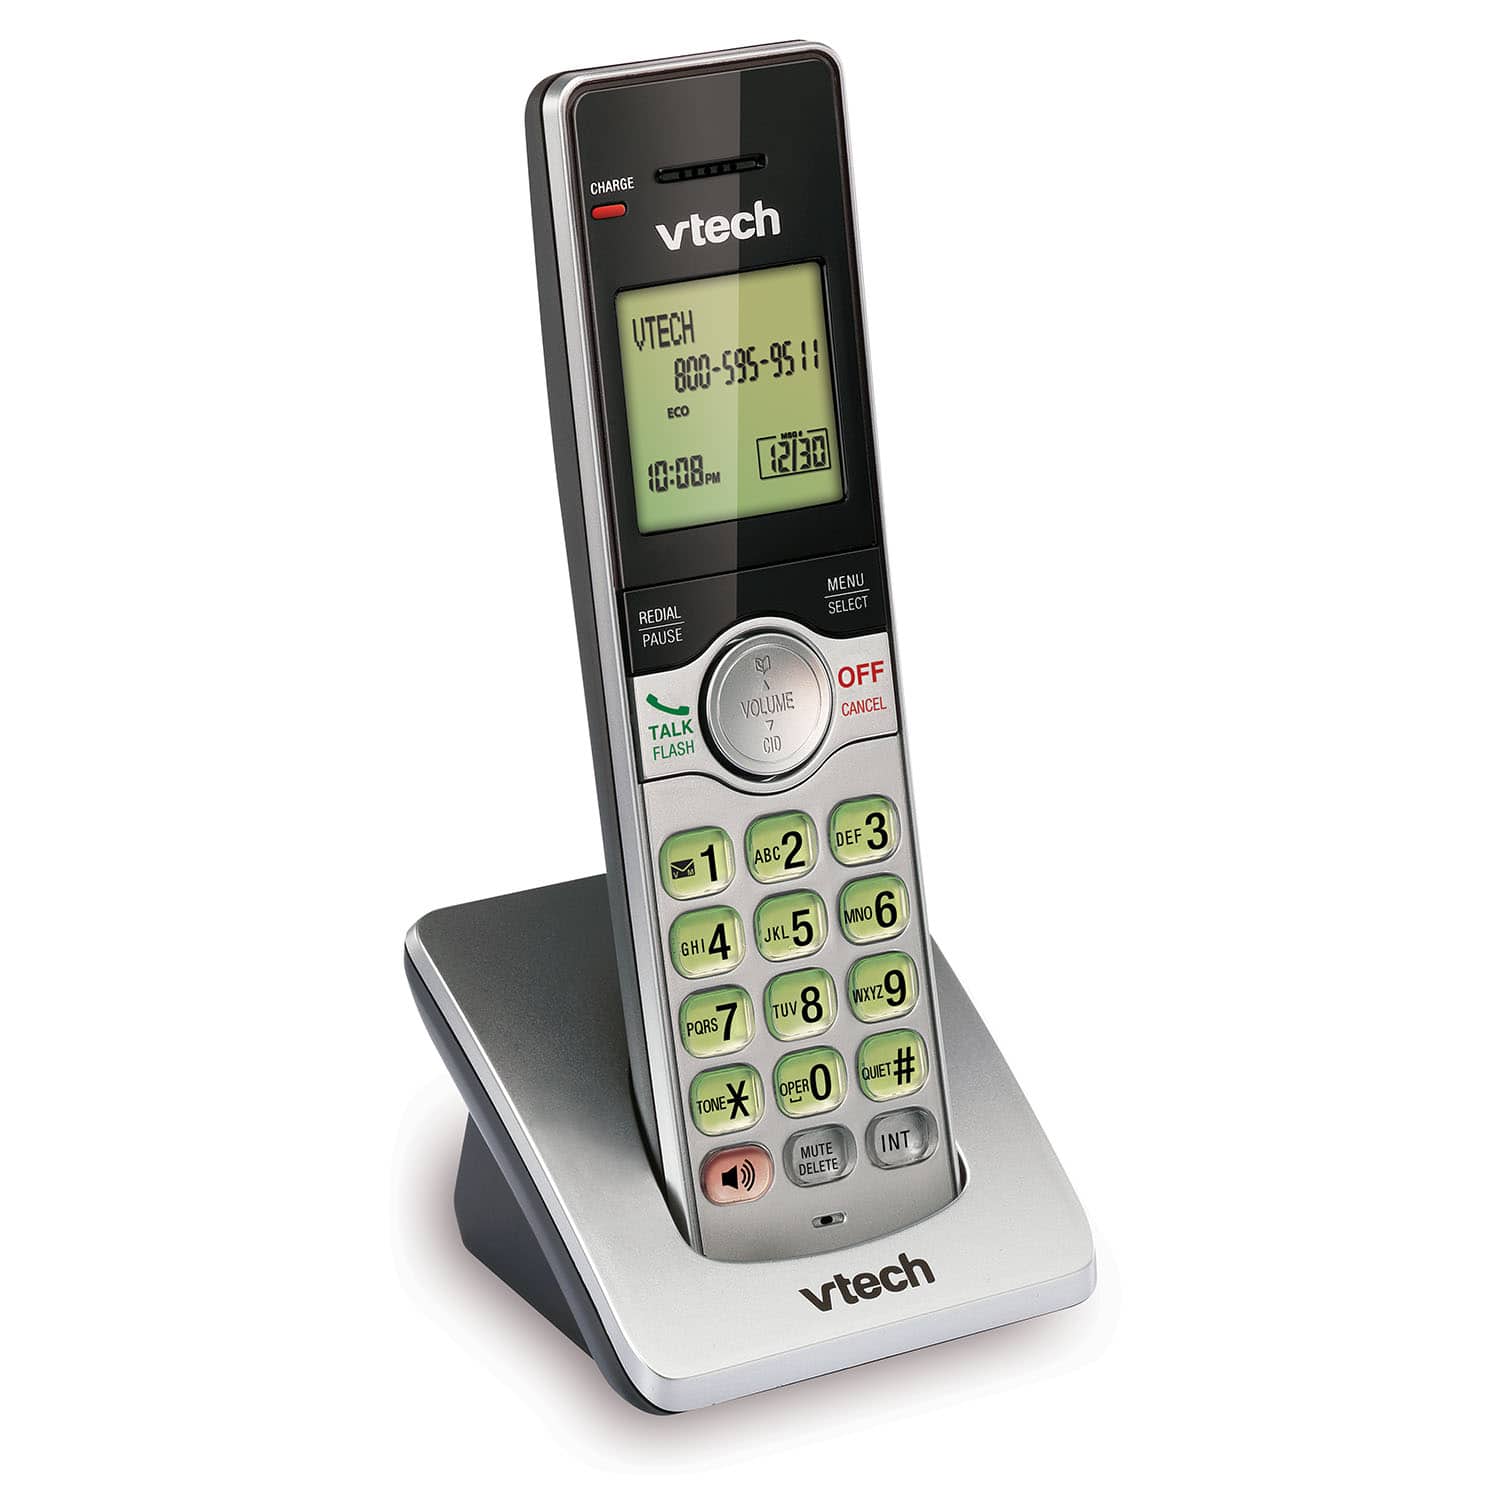 Accessory Handset with Caller ID/Call Waiting